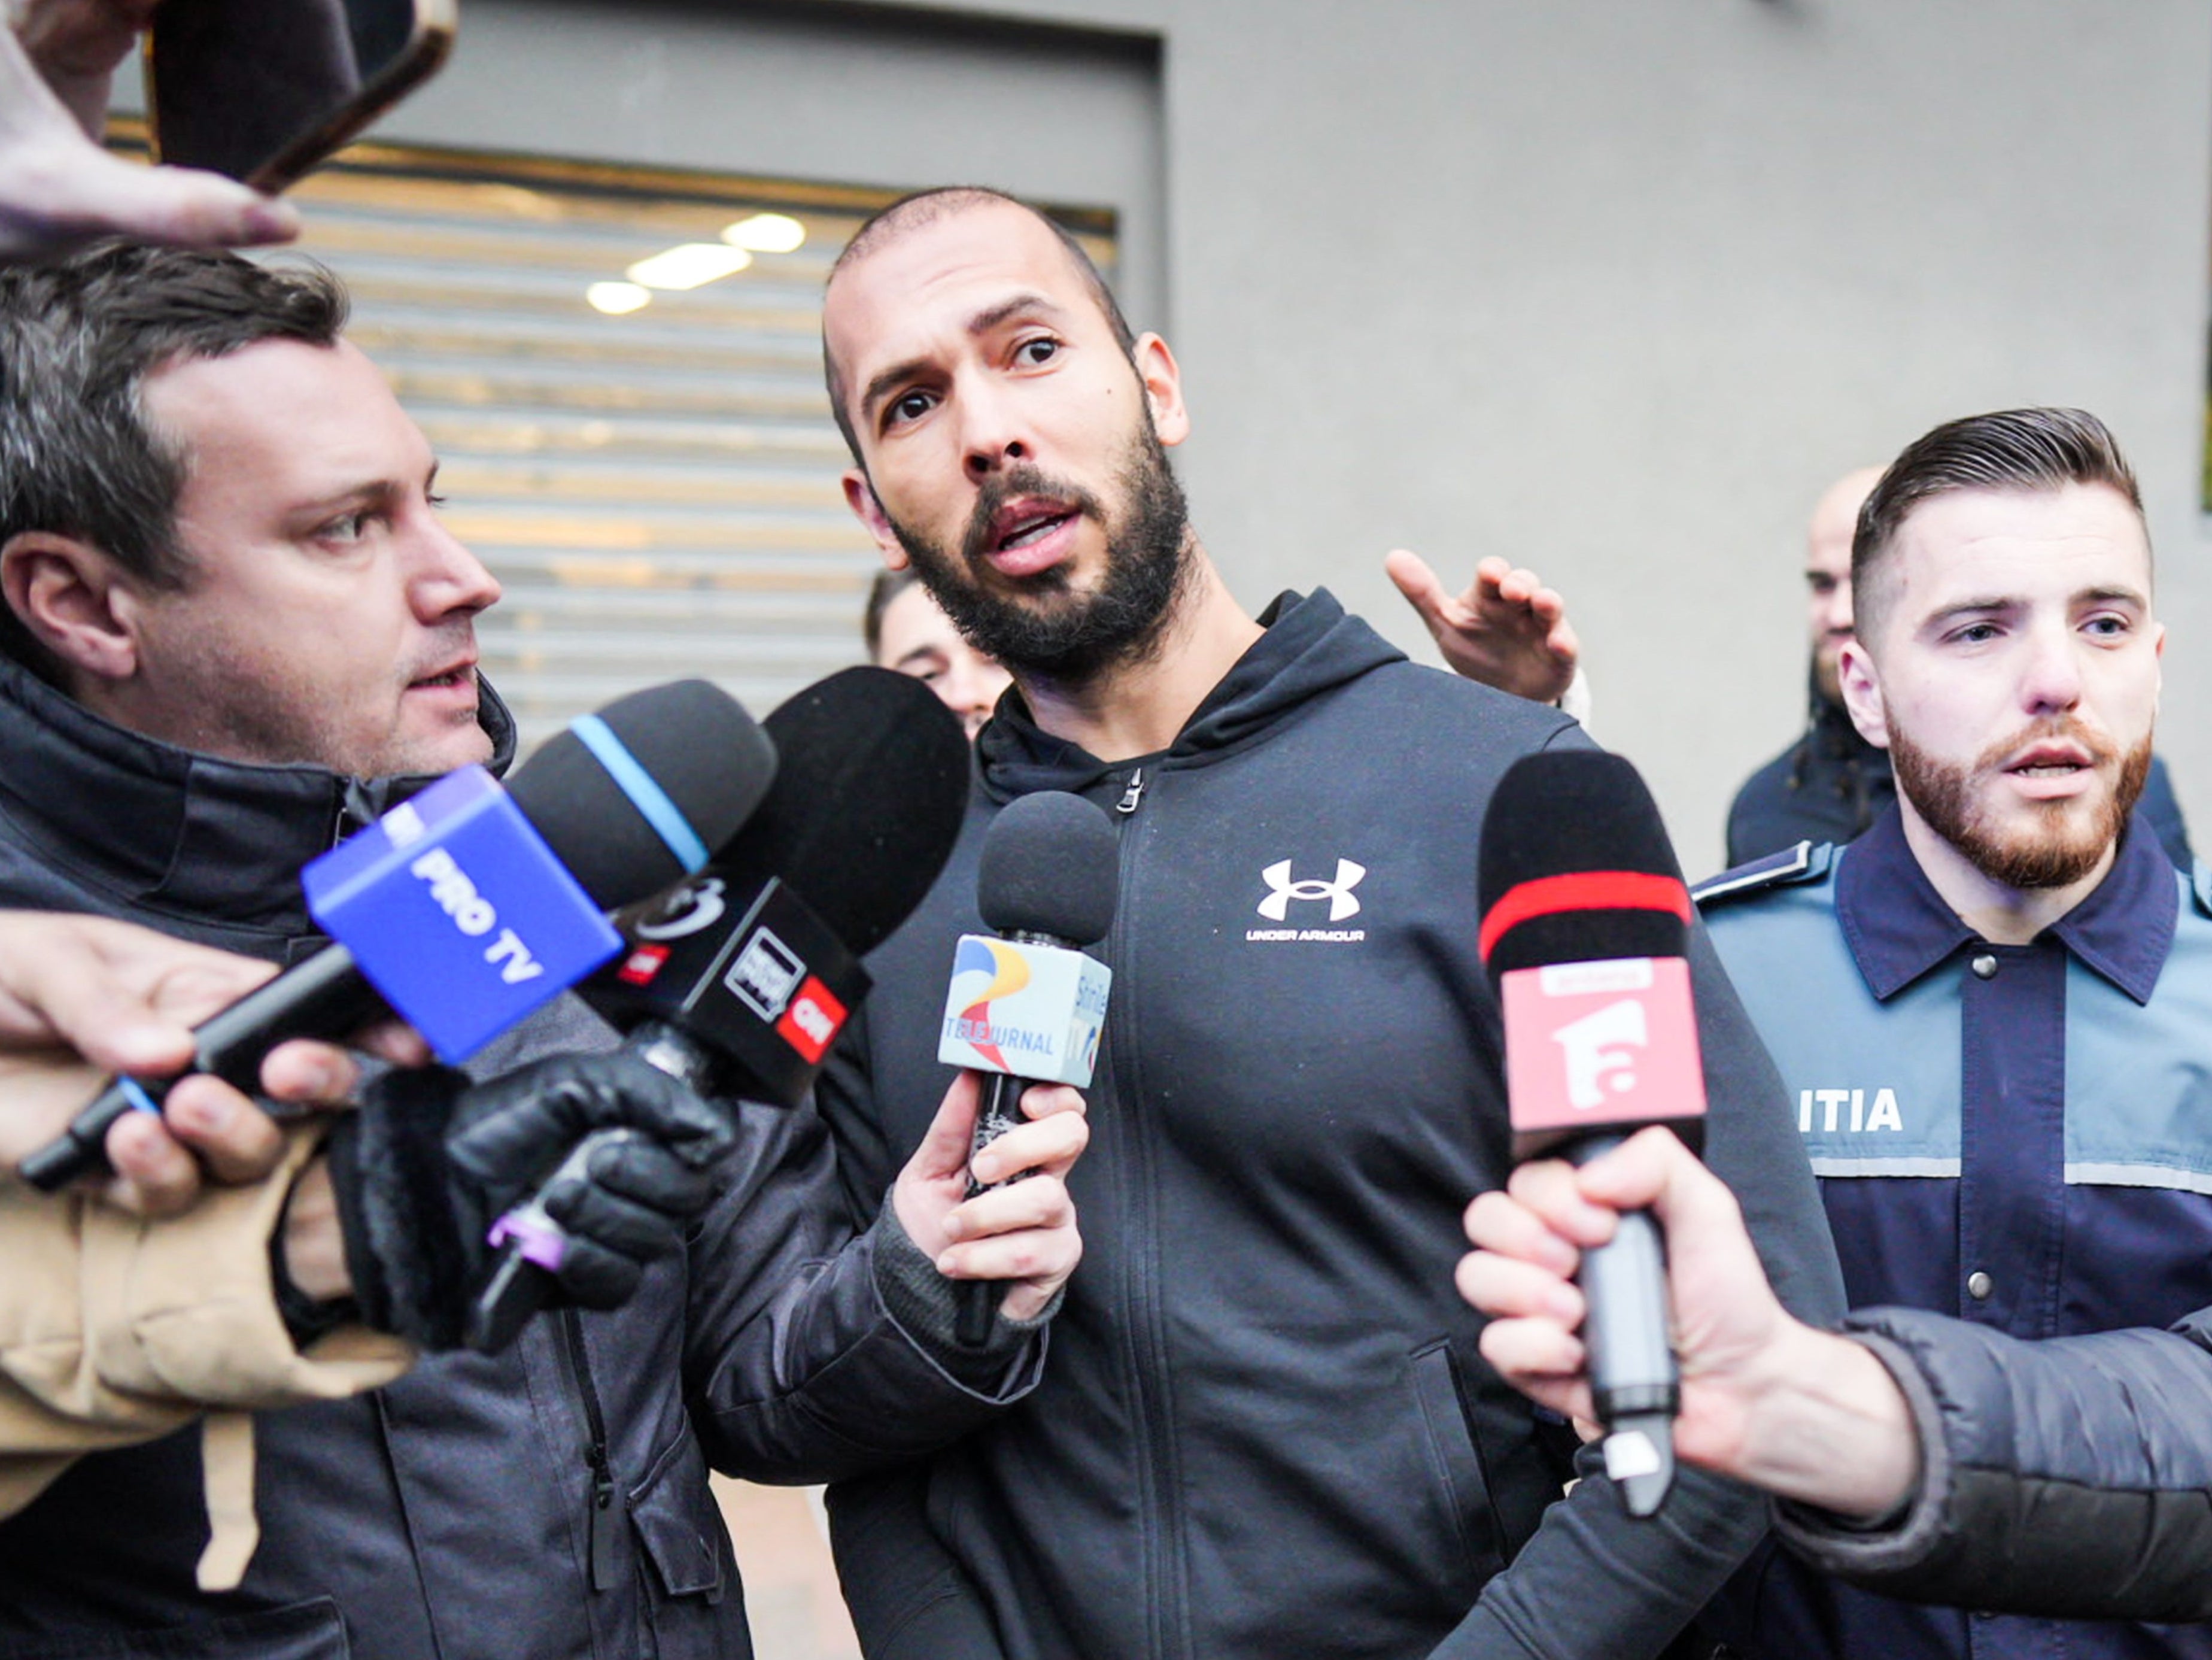 Tate speaks to reporters in Bucharest – he and his brother will be forced to stay in detention until late February